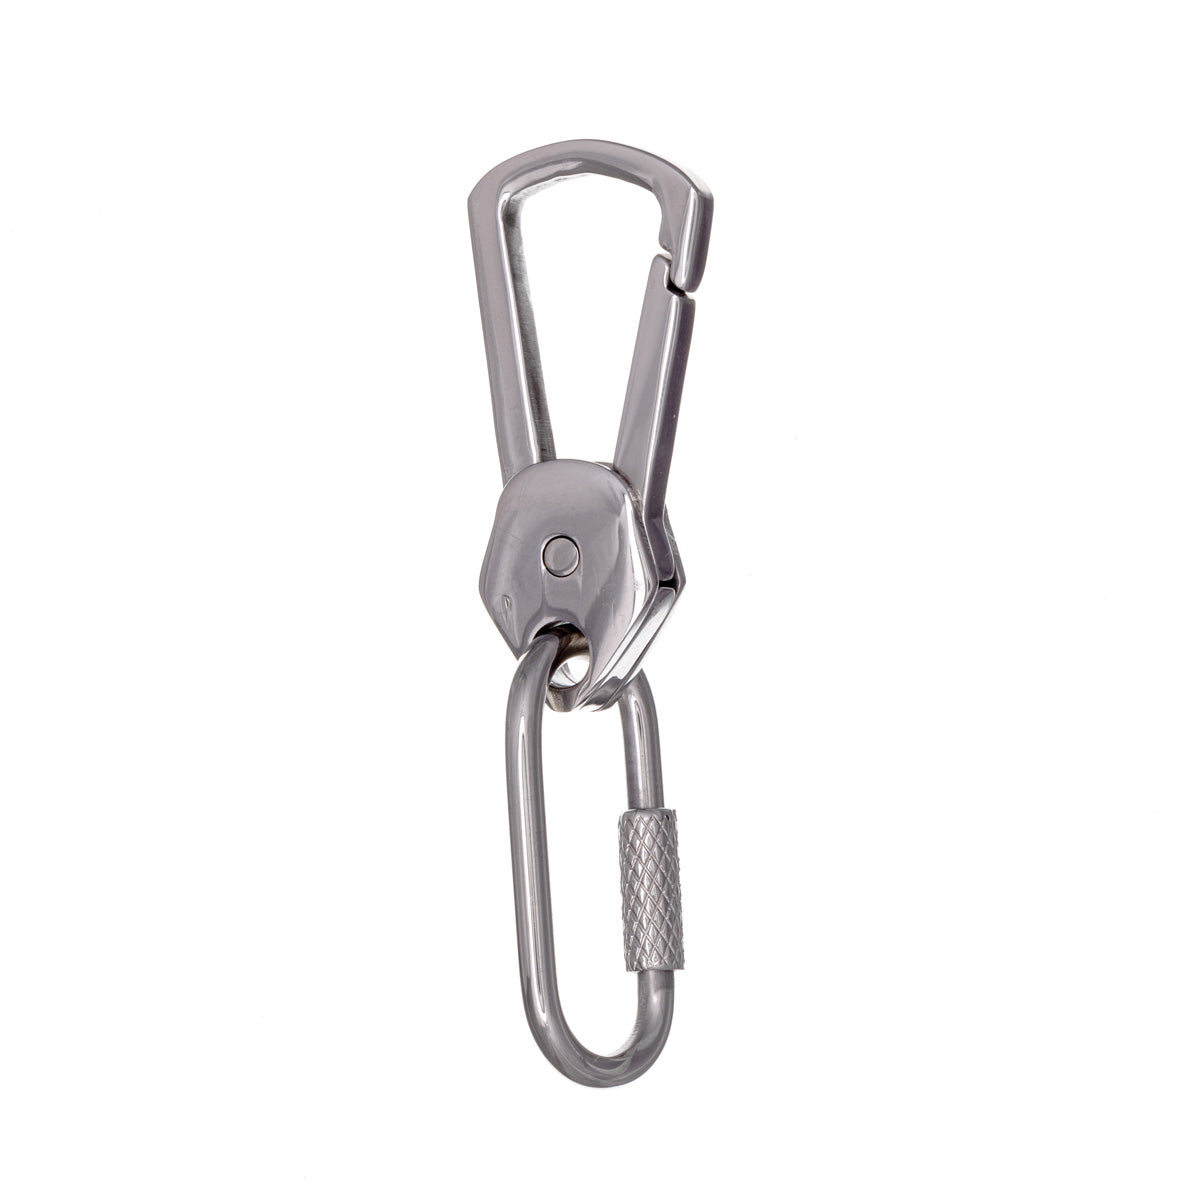 Steel key ring with quick lock carabiner (Steel 316L)